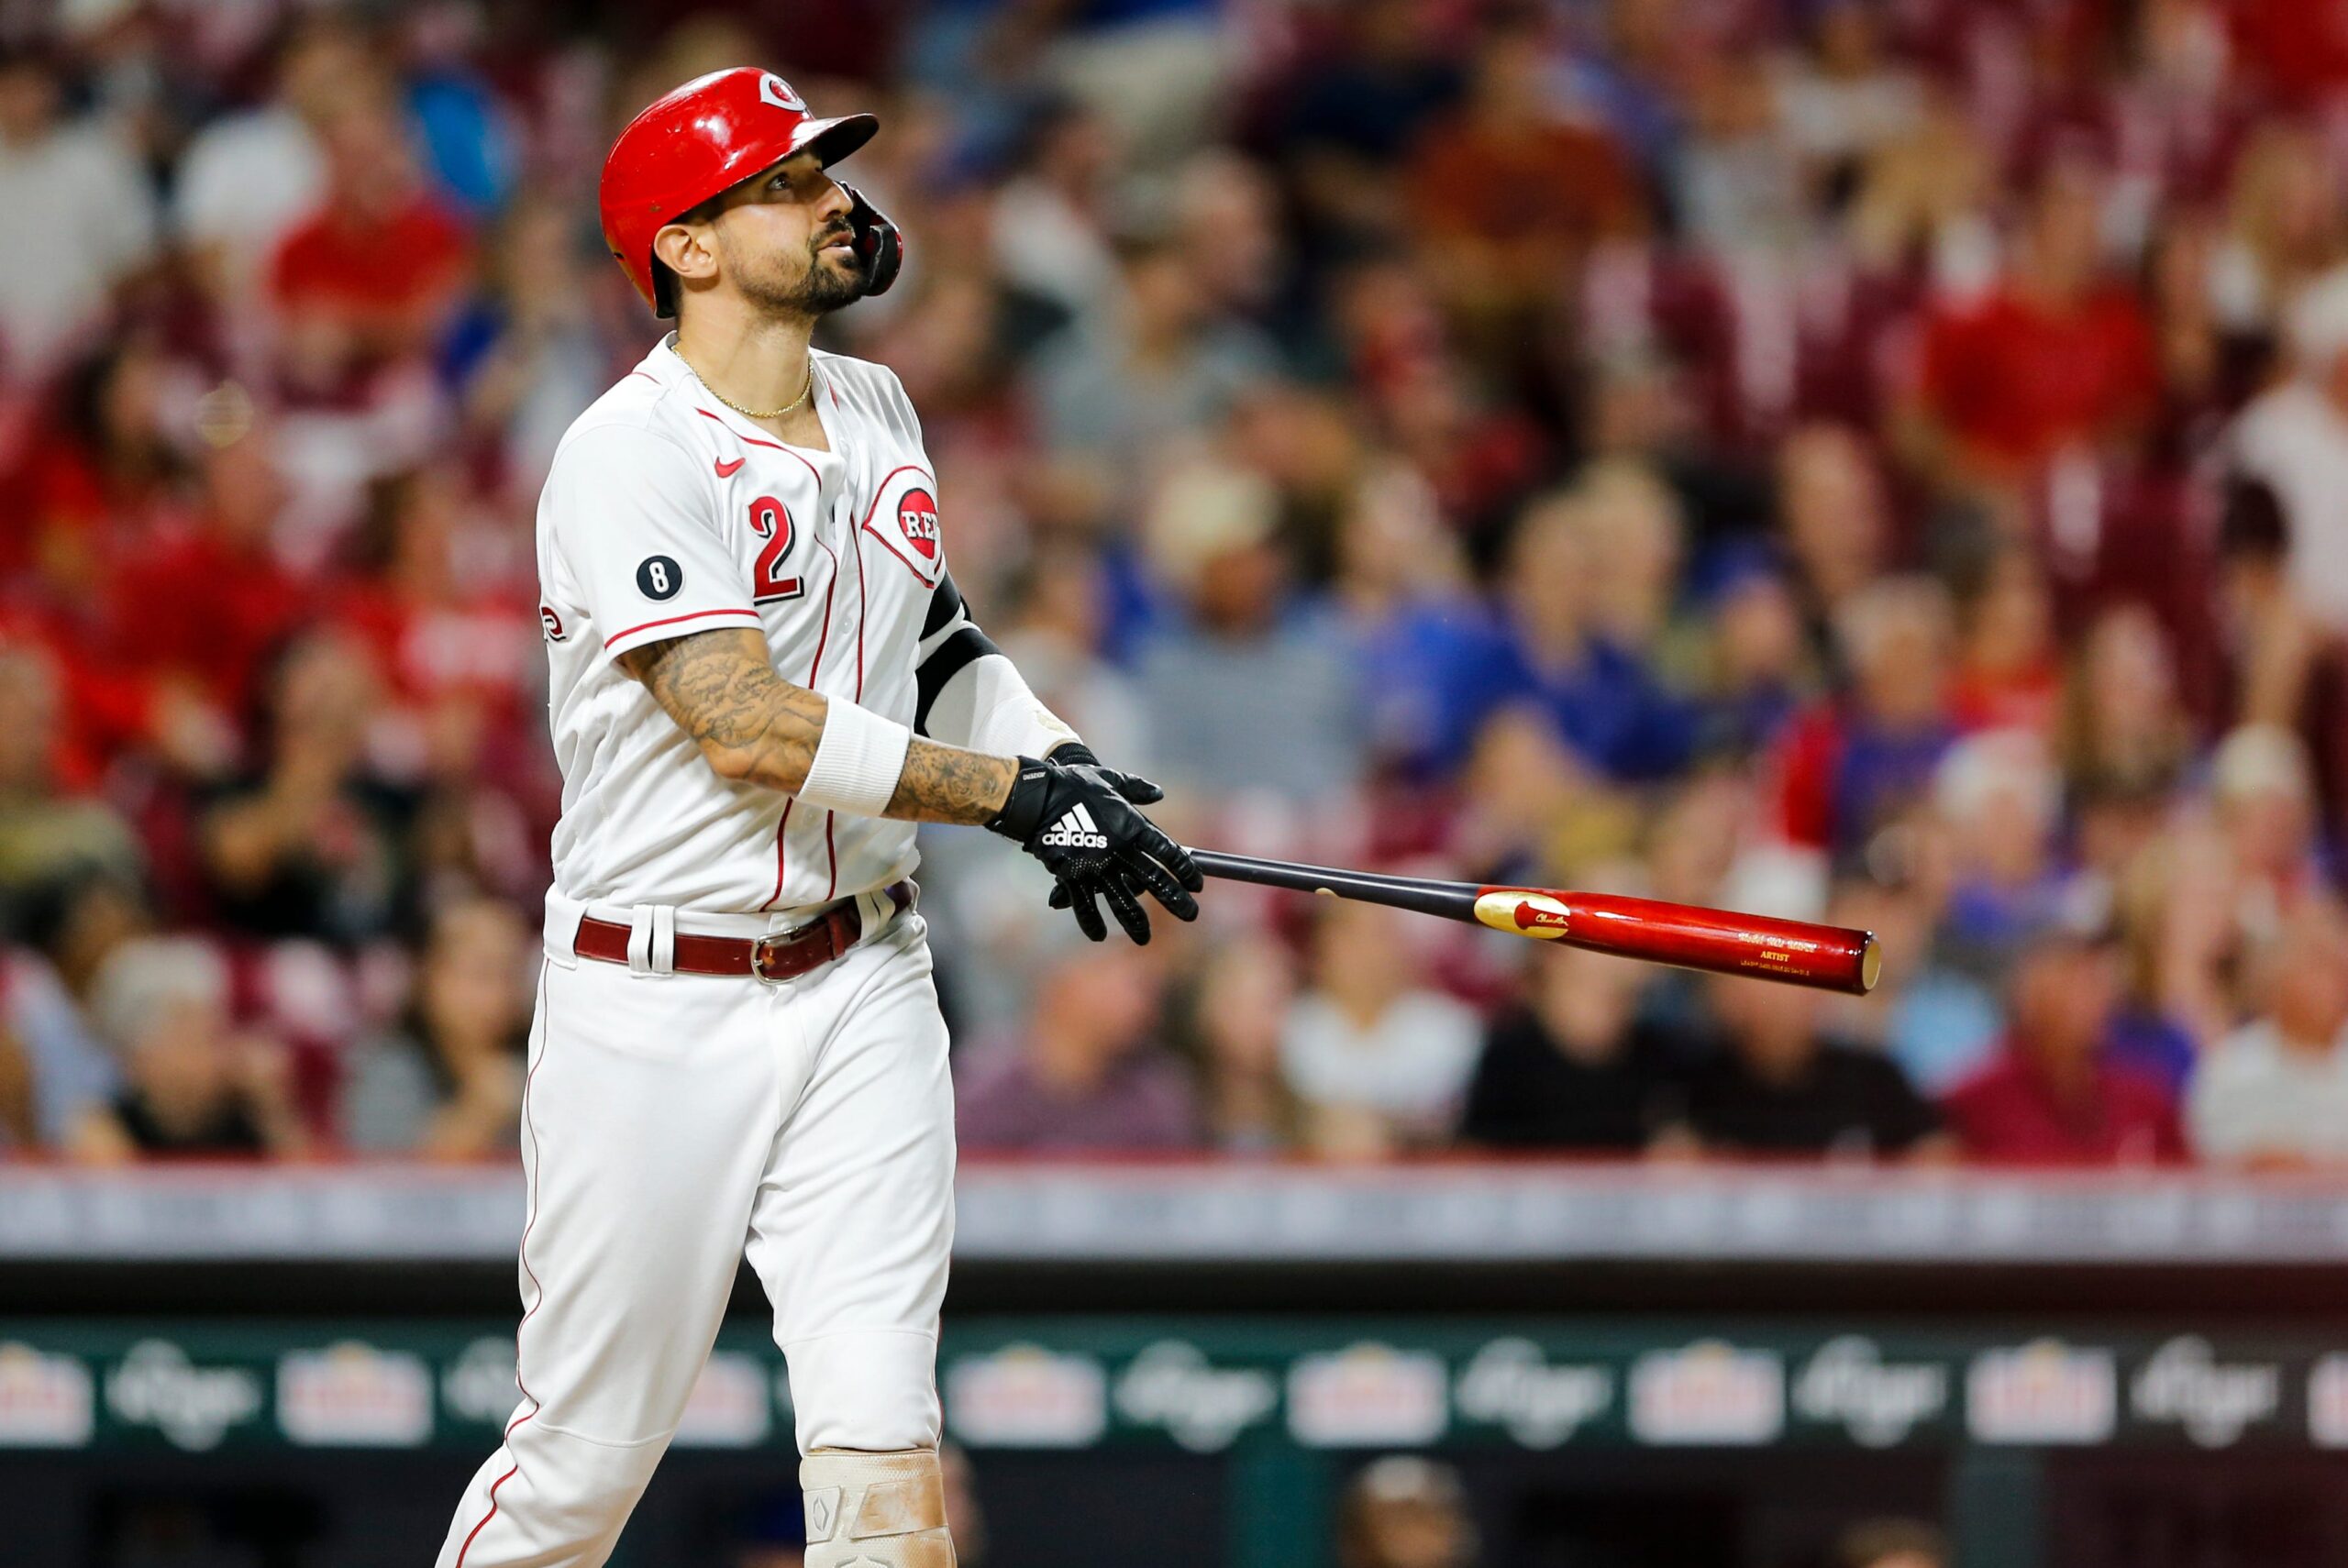 Reds' Castellanos named NL Player of the Week - The Tribune